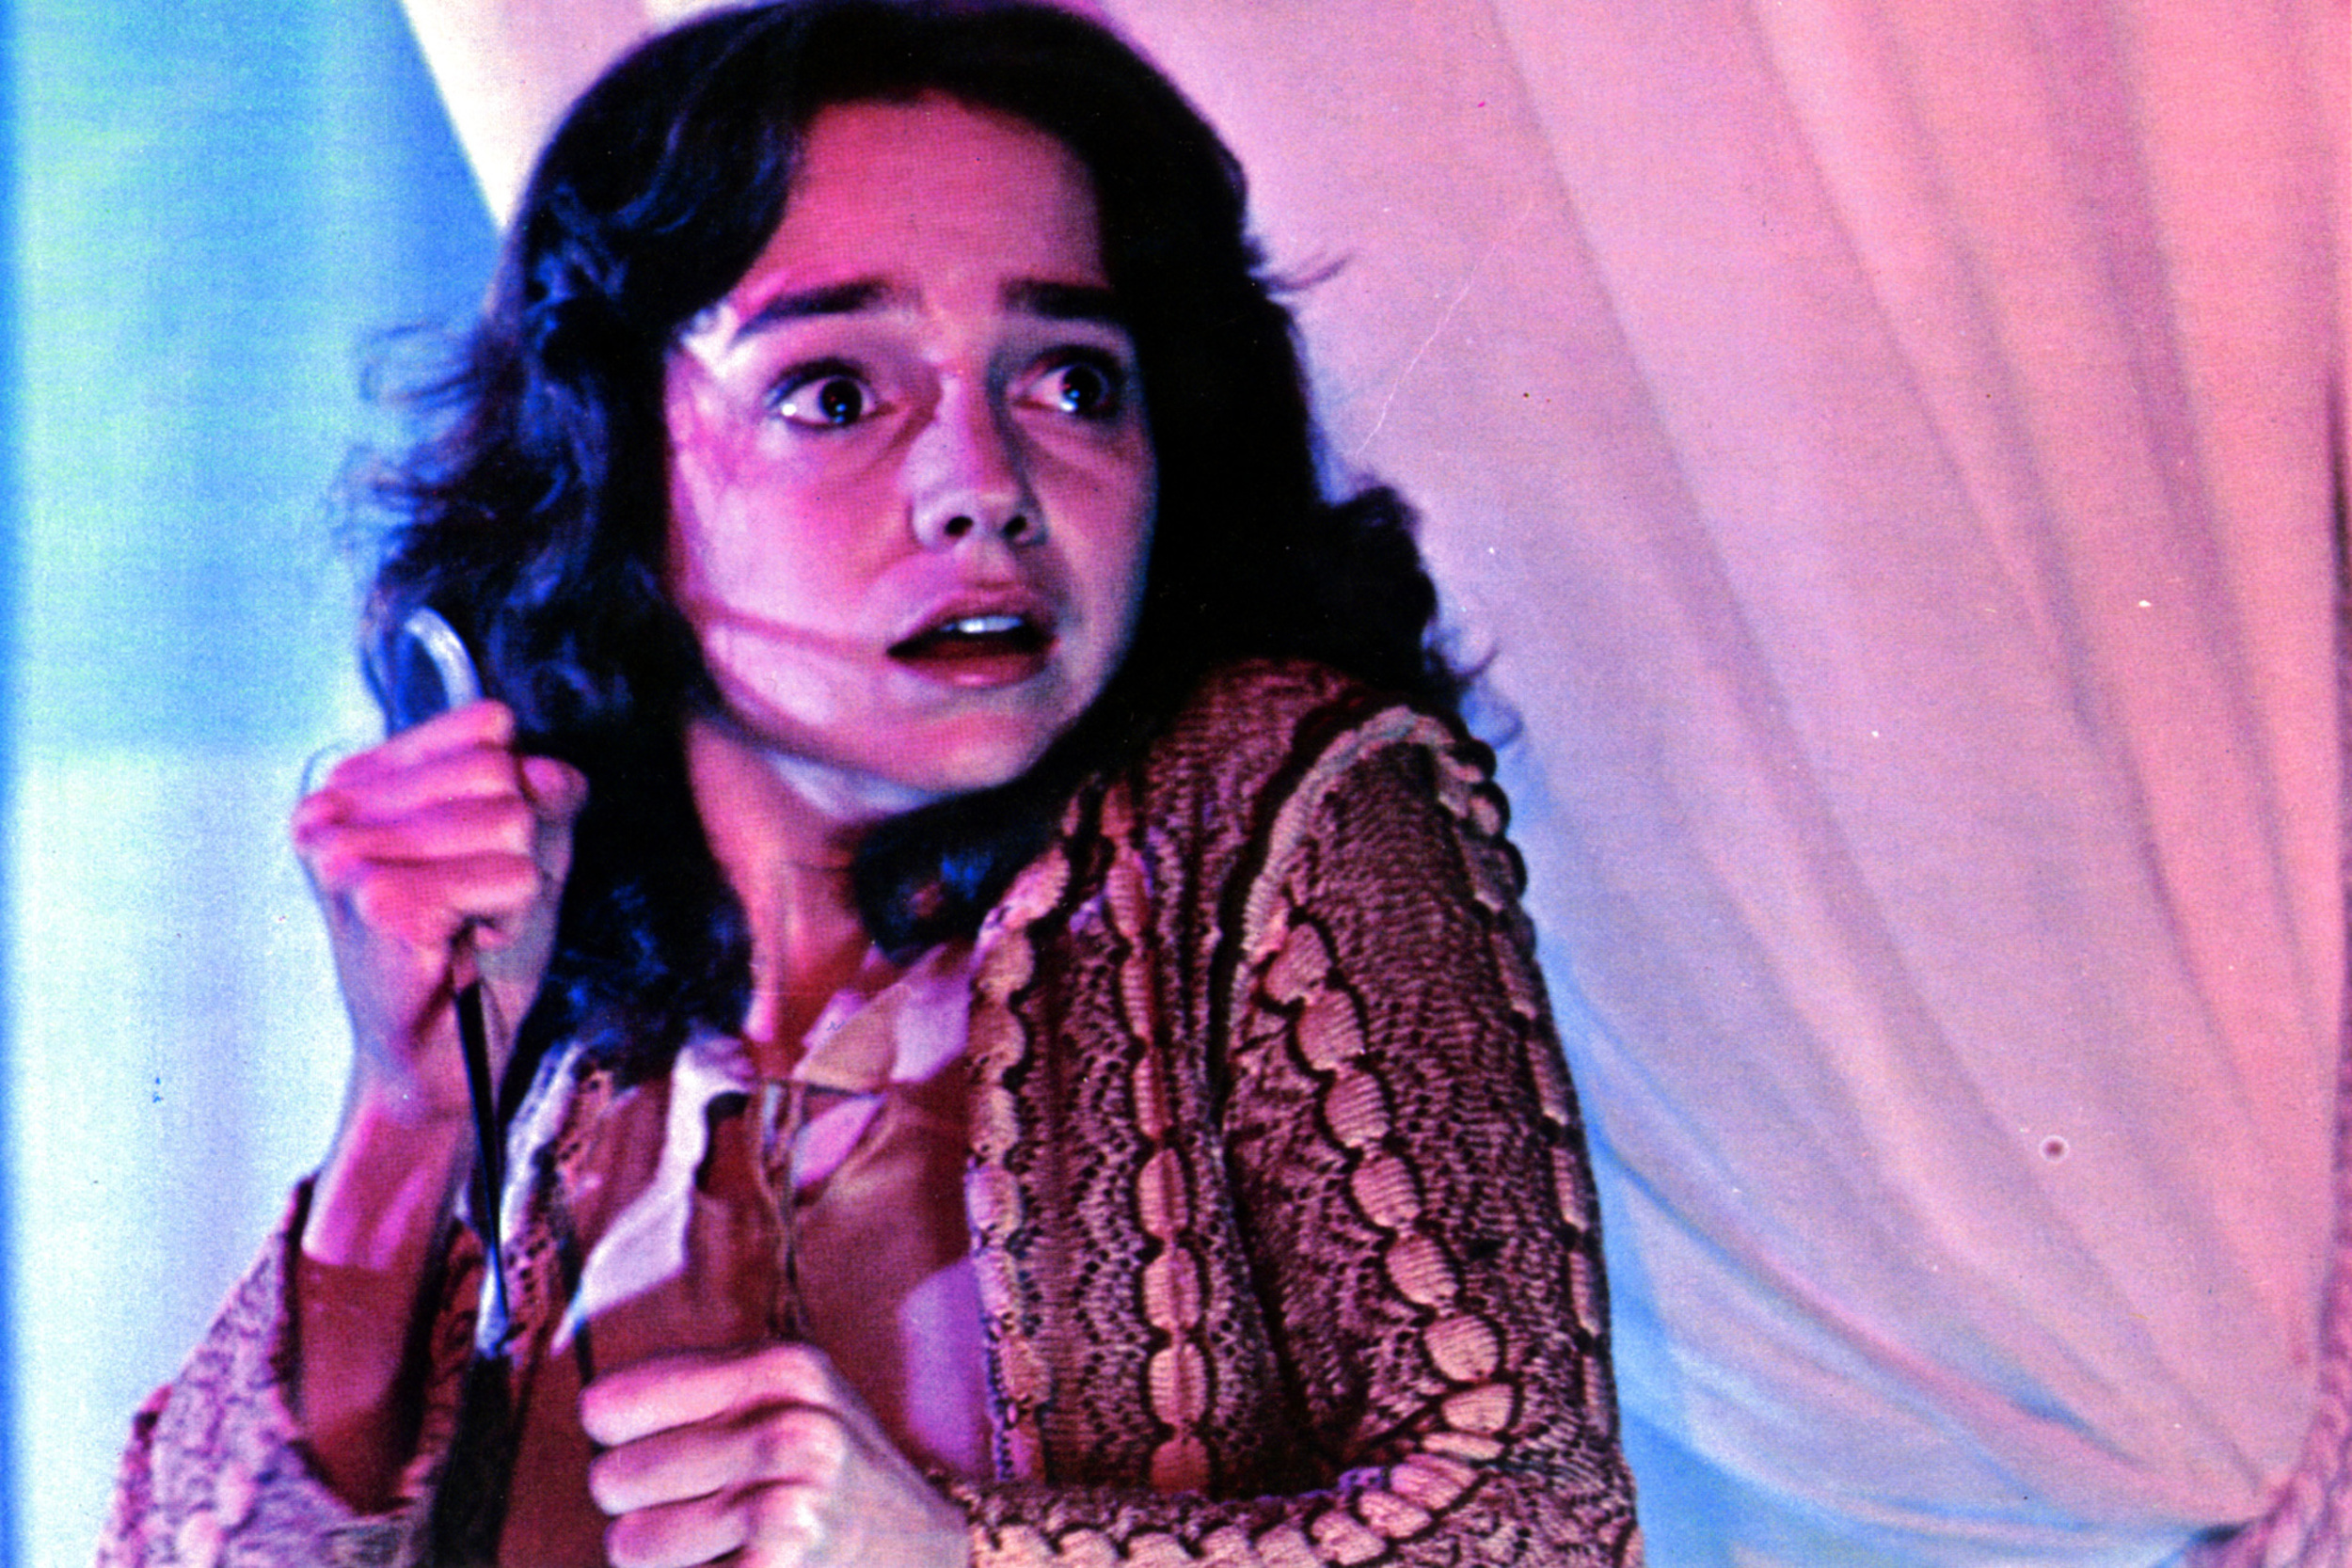 <p>You probably weren't planning on joining a ballet school, but if you were, <em>Suspiria</em> will change your mind for good. The horror classic sees a girl arrive at a ballet school run by witches, which leads to all sorts of terror amidst its halls. It's a showcase for Dario Argento's stylish filmmaking — a gonzo blend of bright colors and fairytale dread. </p><p><a href='https://www.msn.com/en-us/community/channel/vid-cj9pqbr0vn9in2b6ddcd8sfgpfq6x6utp44fssrv6mc2gtybw0us'>Follow us on MSN to see more of our exclusive entertainment content.</a></p>